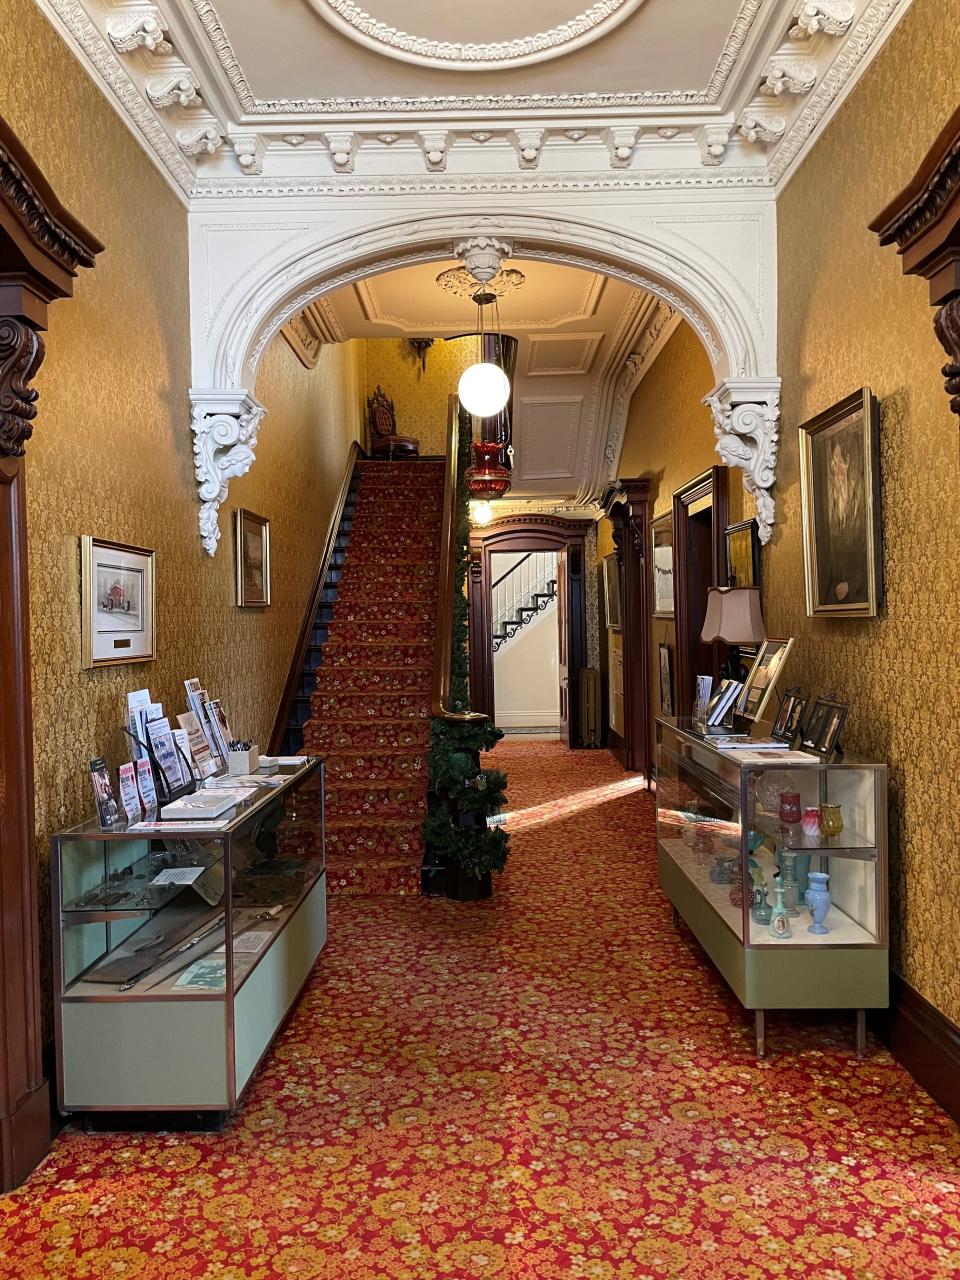 The home includes this impressive entrance foyer. Though the museum is no longer available for daily public tours, guests to the Marion Community Foundation are invited to explore the home while visiting, and some events are occasionally open to the general public.